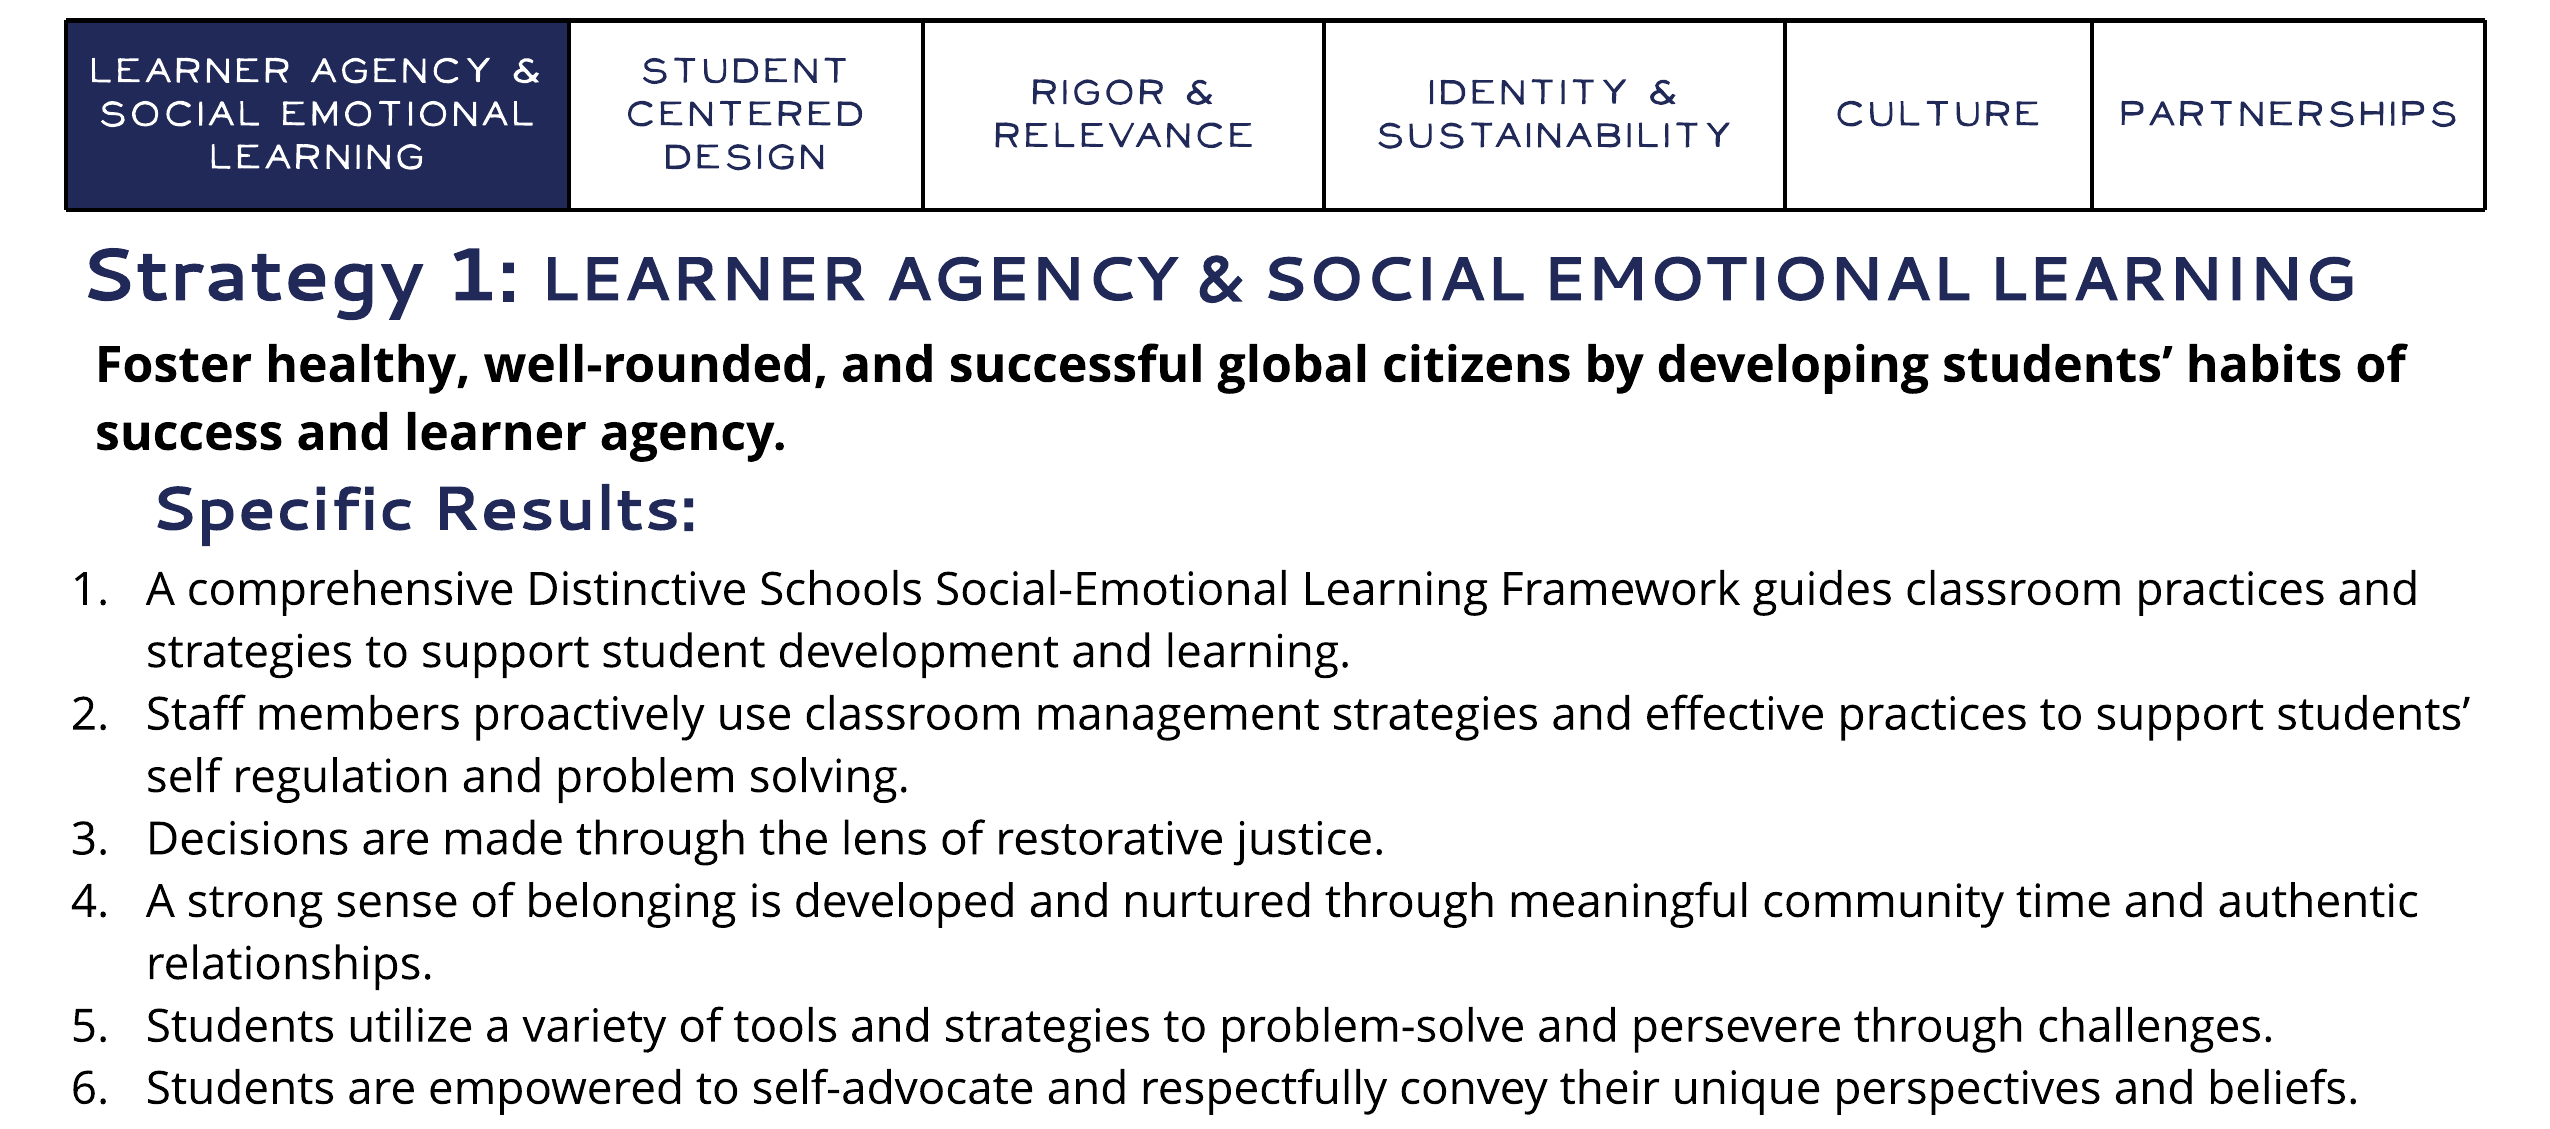 Strategy 1: Learner Agency & Social Emotional Learning – download here: https://5il.co/wsbg